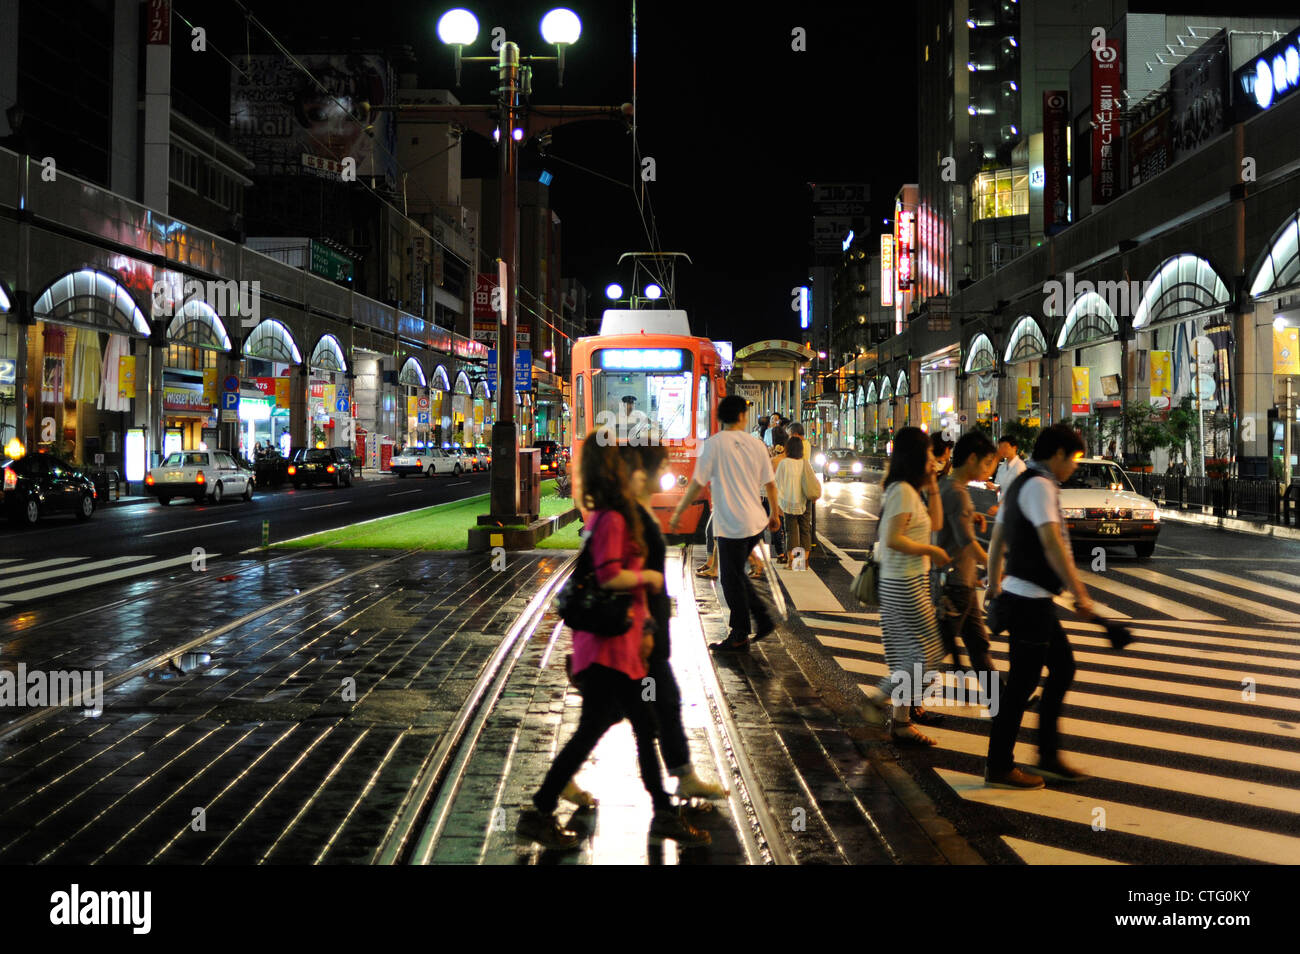 Pedestrians walk in front of a tram in Kagoshima, Japan Stock Photo